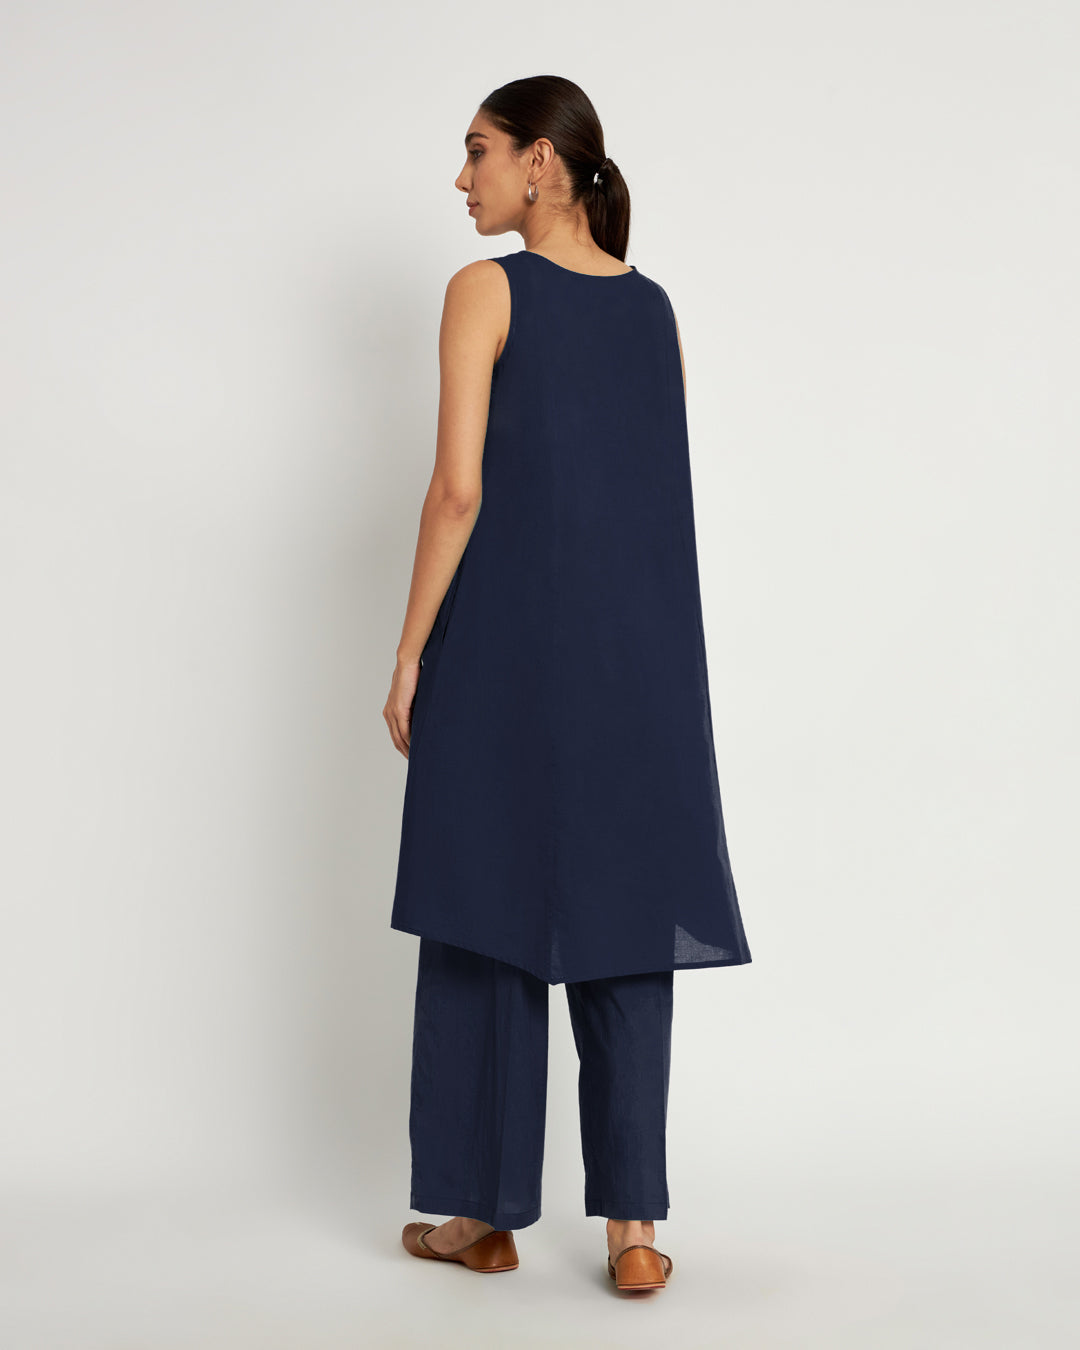 Midnight Blue Sleeveless A-Line Solid Kurta (Without Bottoms)